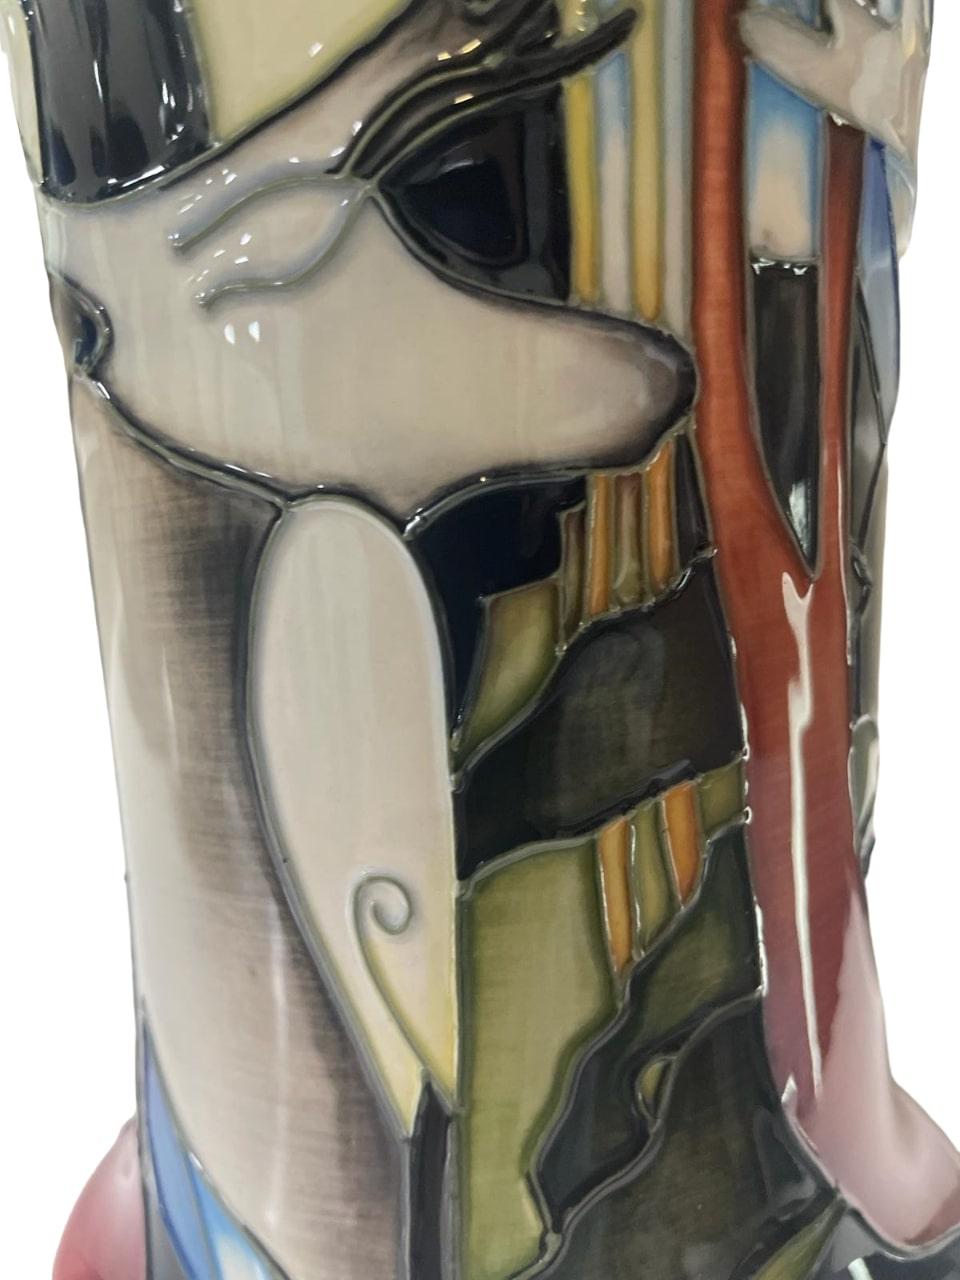 LIMITED EDITION MOORCROFT Wapiti vase by Emma Bossons dated 2012 31/35 For Sale 3